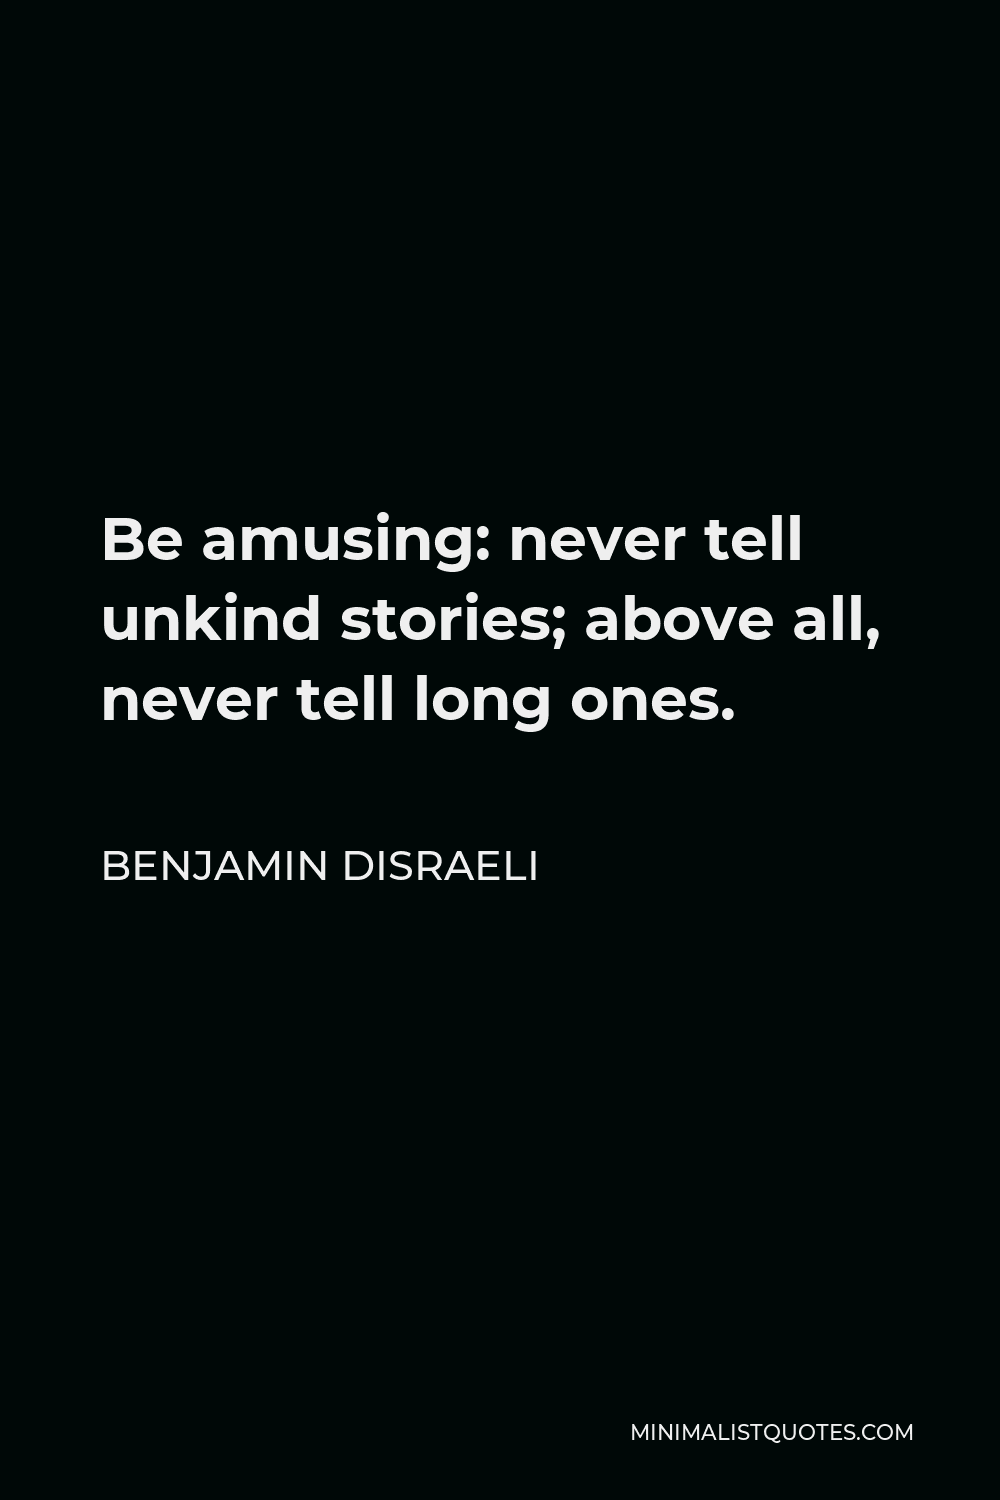 Benjamin Disraeli Quote - Be amusing: never tell unkind stories; above all, never tell long ones.